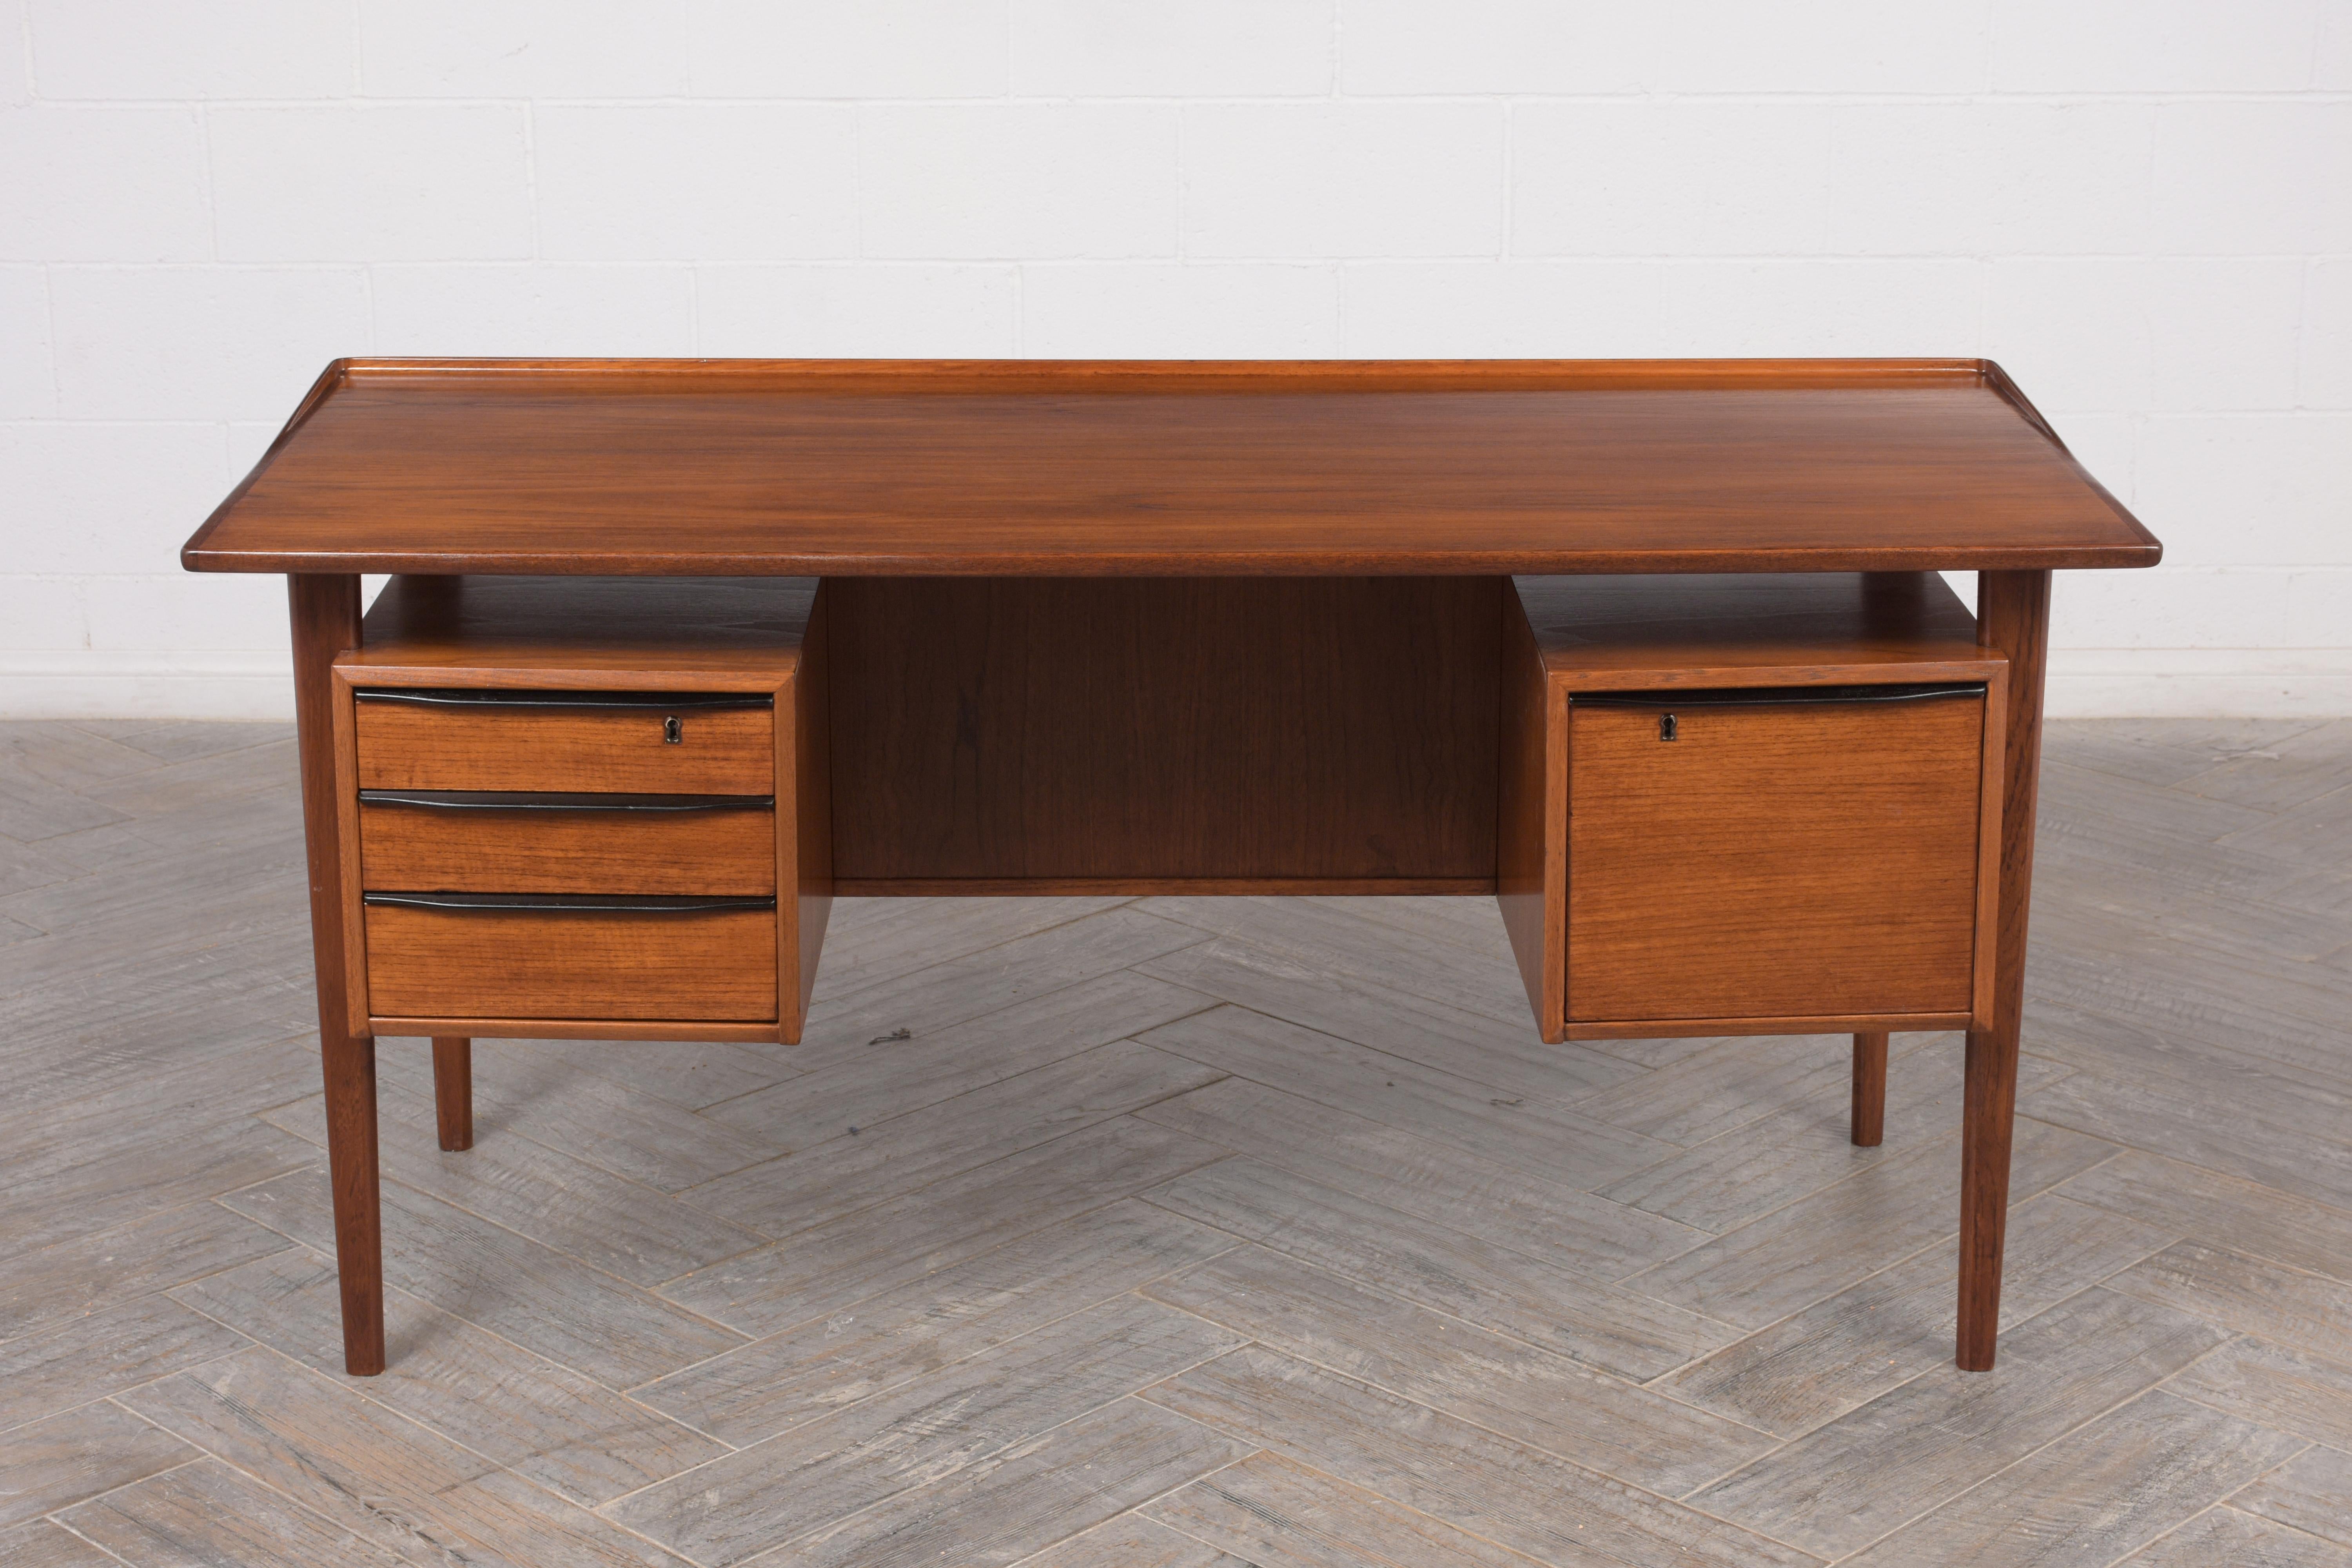 This 1960s Mid-Century Modern floating desk is made from teak wood stained a rich walnut and black color combination with a lacquered finish. The four drawers have carved wood handles finished in black color and the top drawers on each side with